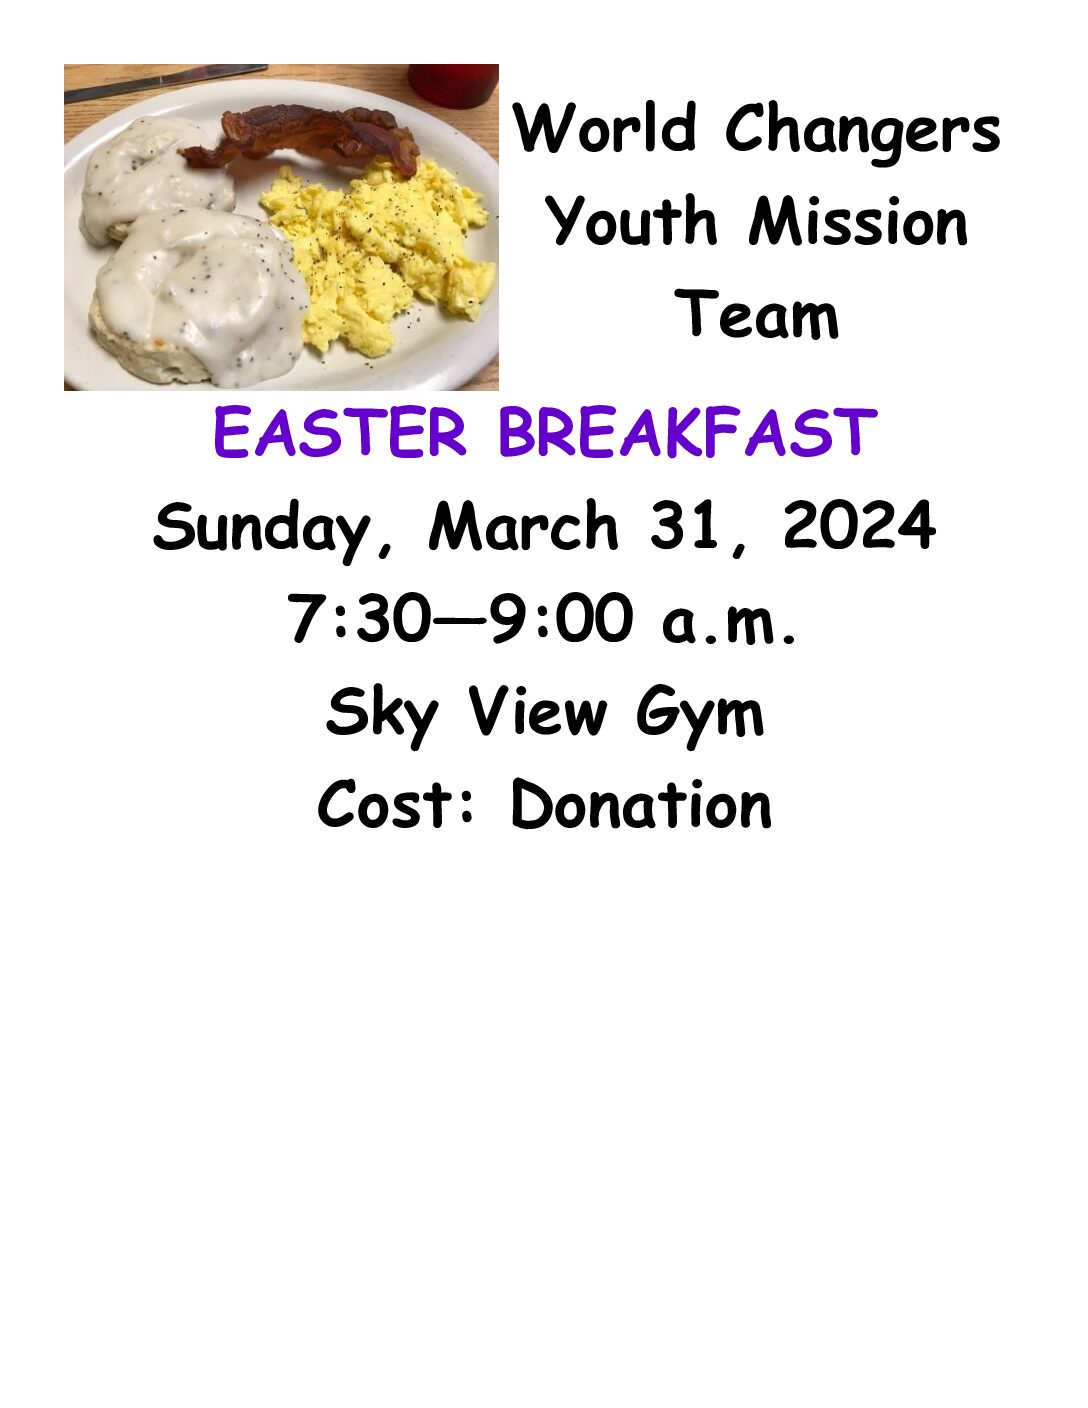 World Changers Youth Mission Team Easter Breakfast